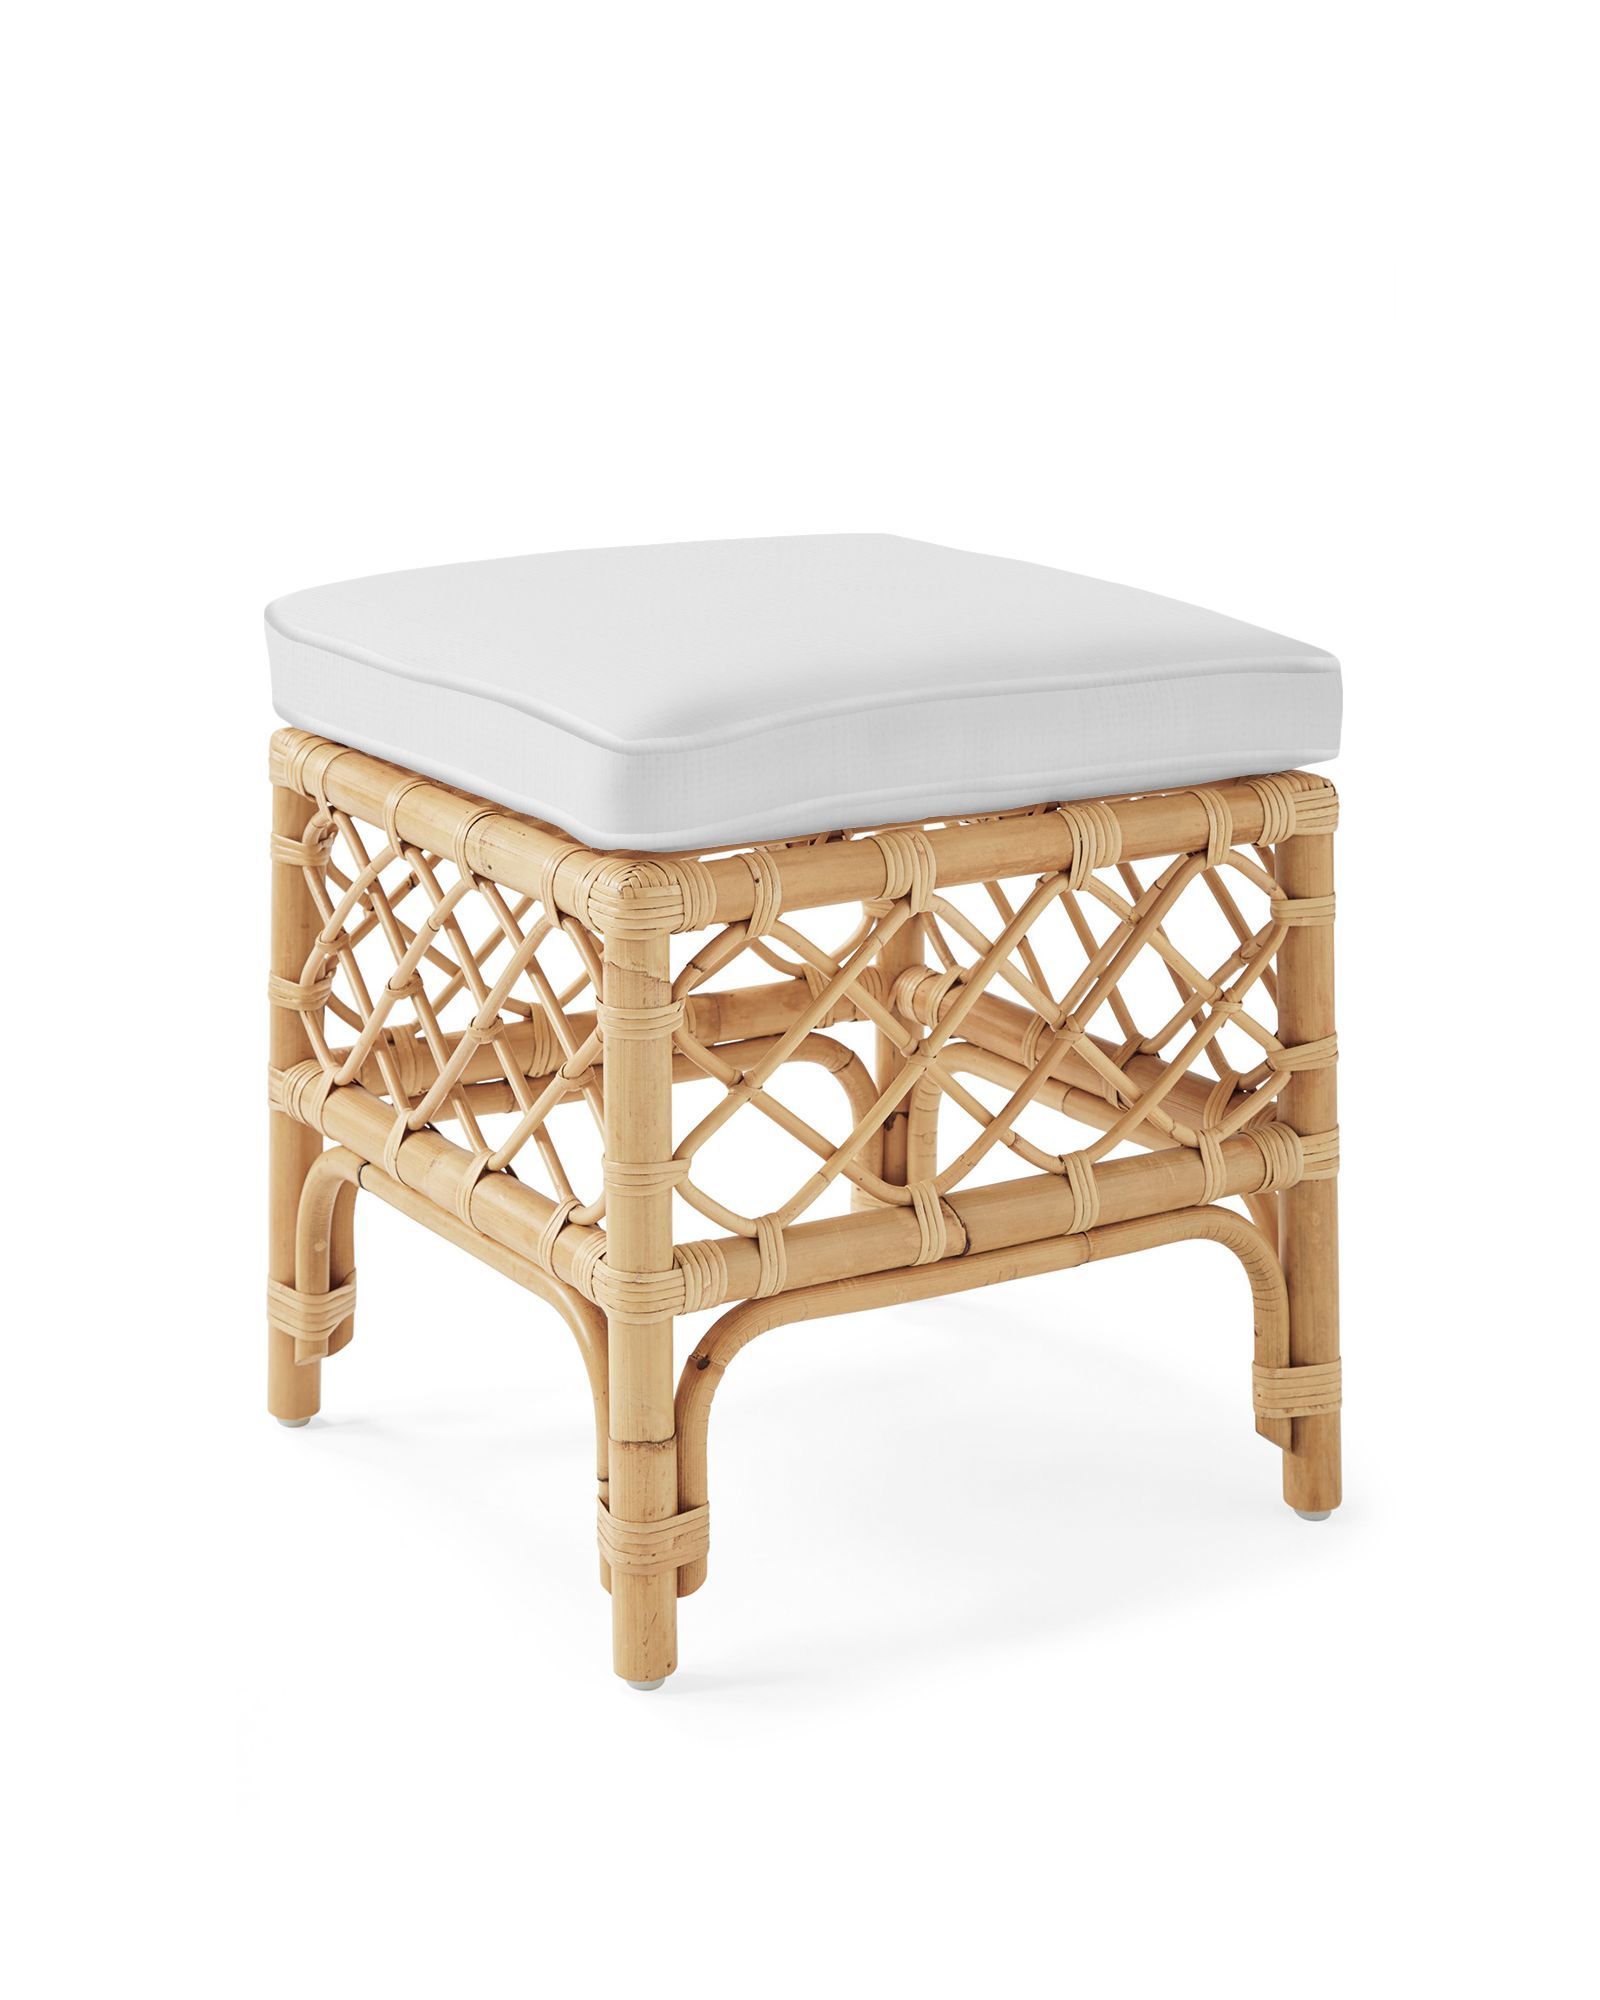 Avalon Rattan Stool - Natural | Serena and Lily